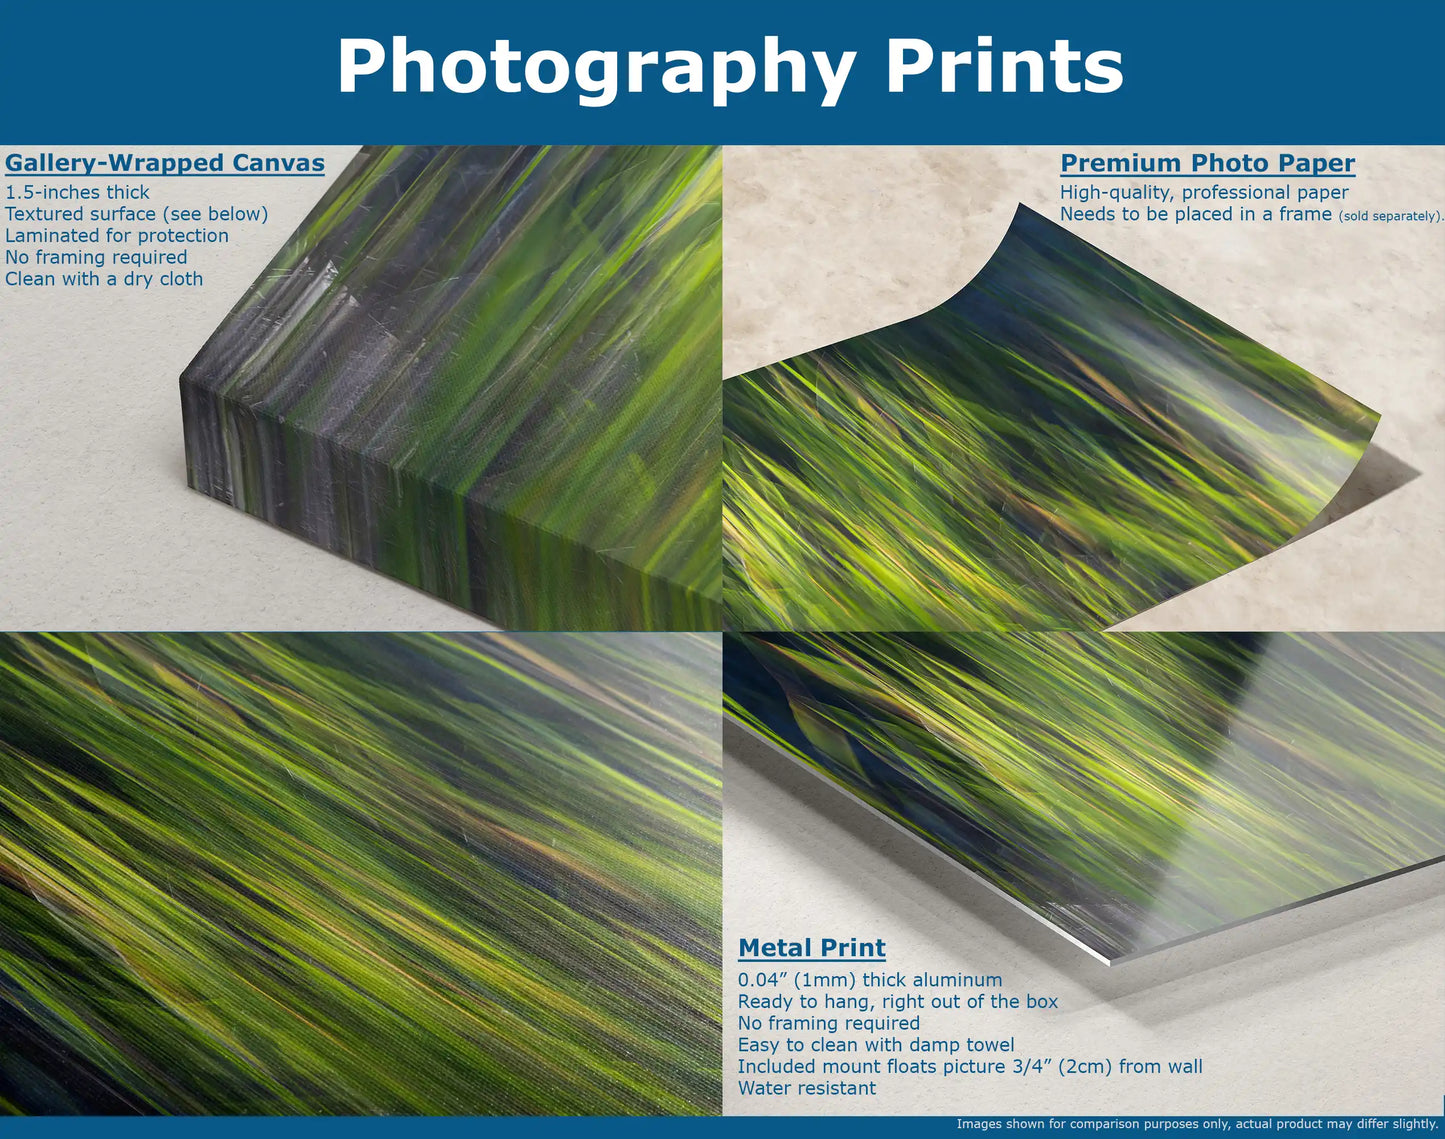 Comparison of wall art print mediums: a textured canvas wrap, a glossy premium photo paper, and a sleek metal print, all showcasing the same vibrant green abstract design.